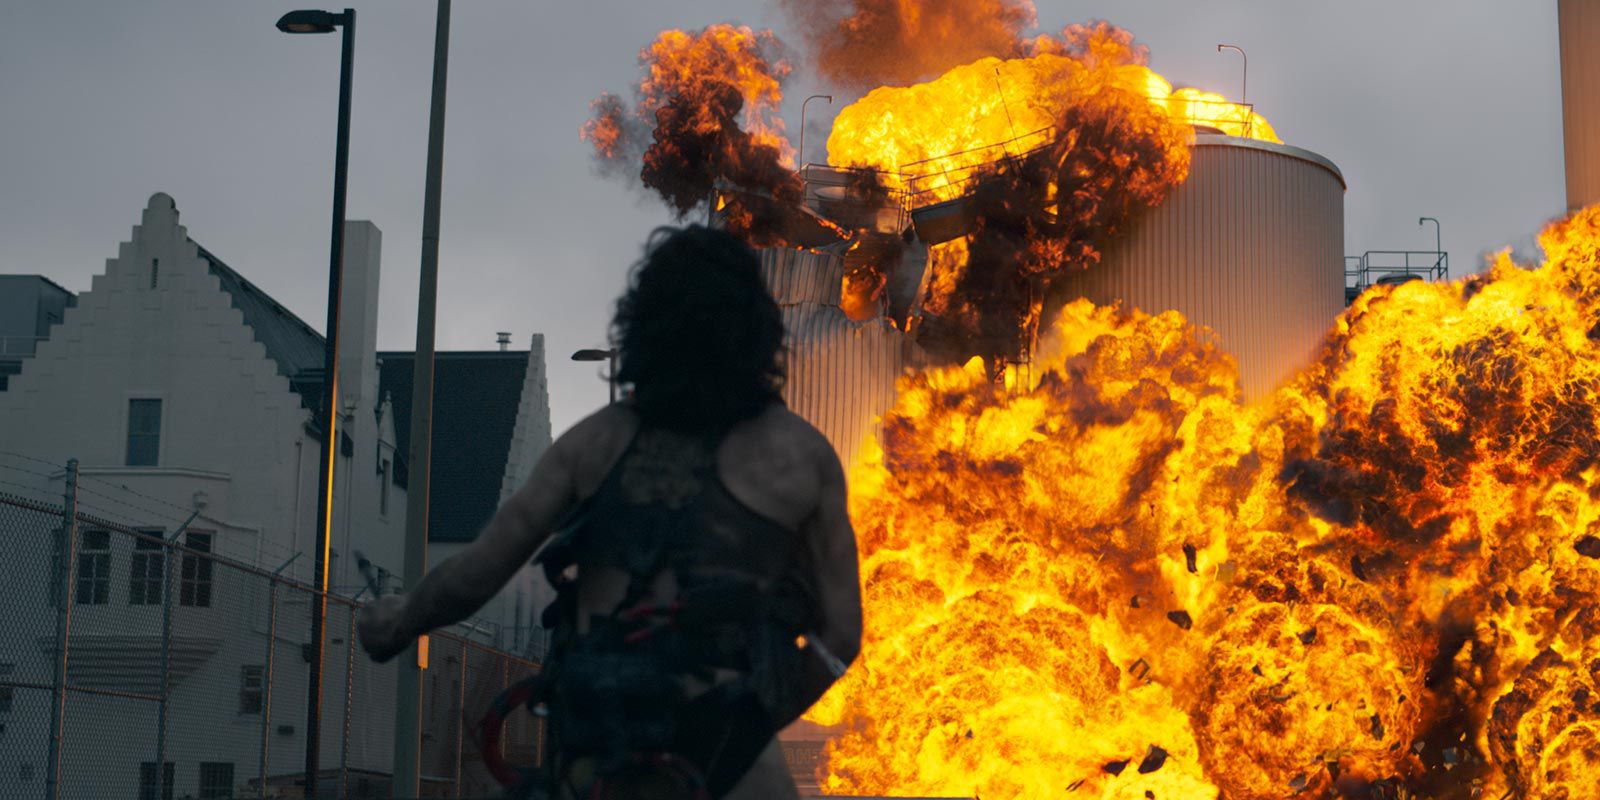 Ezra Miller as the Trashcan Man blowing up the oil tankers in Powtanville, Indiana.